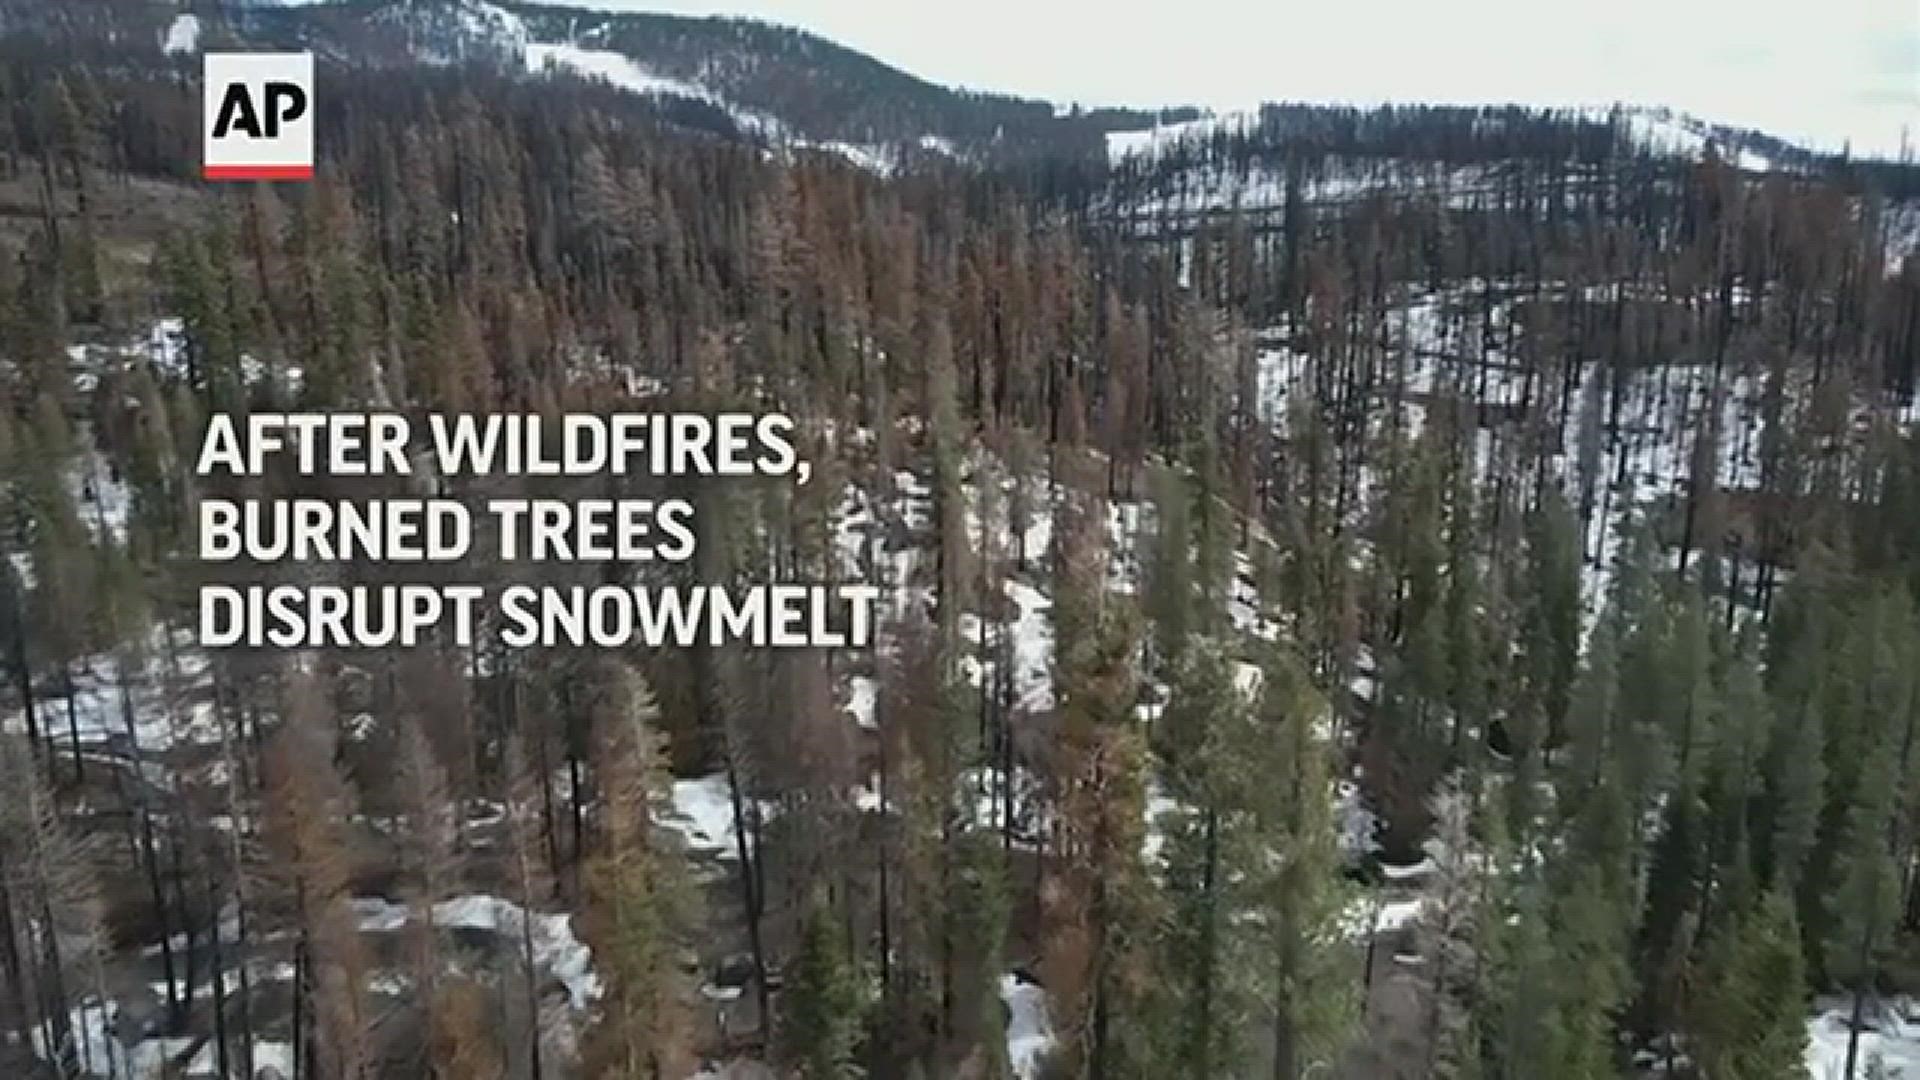 Trees burned by wildfires no longer provide much shade, and are shedding flecks of carbon on the snow that absorb sunlight and speed the melting process.